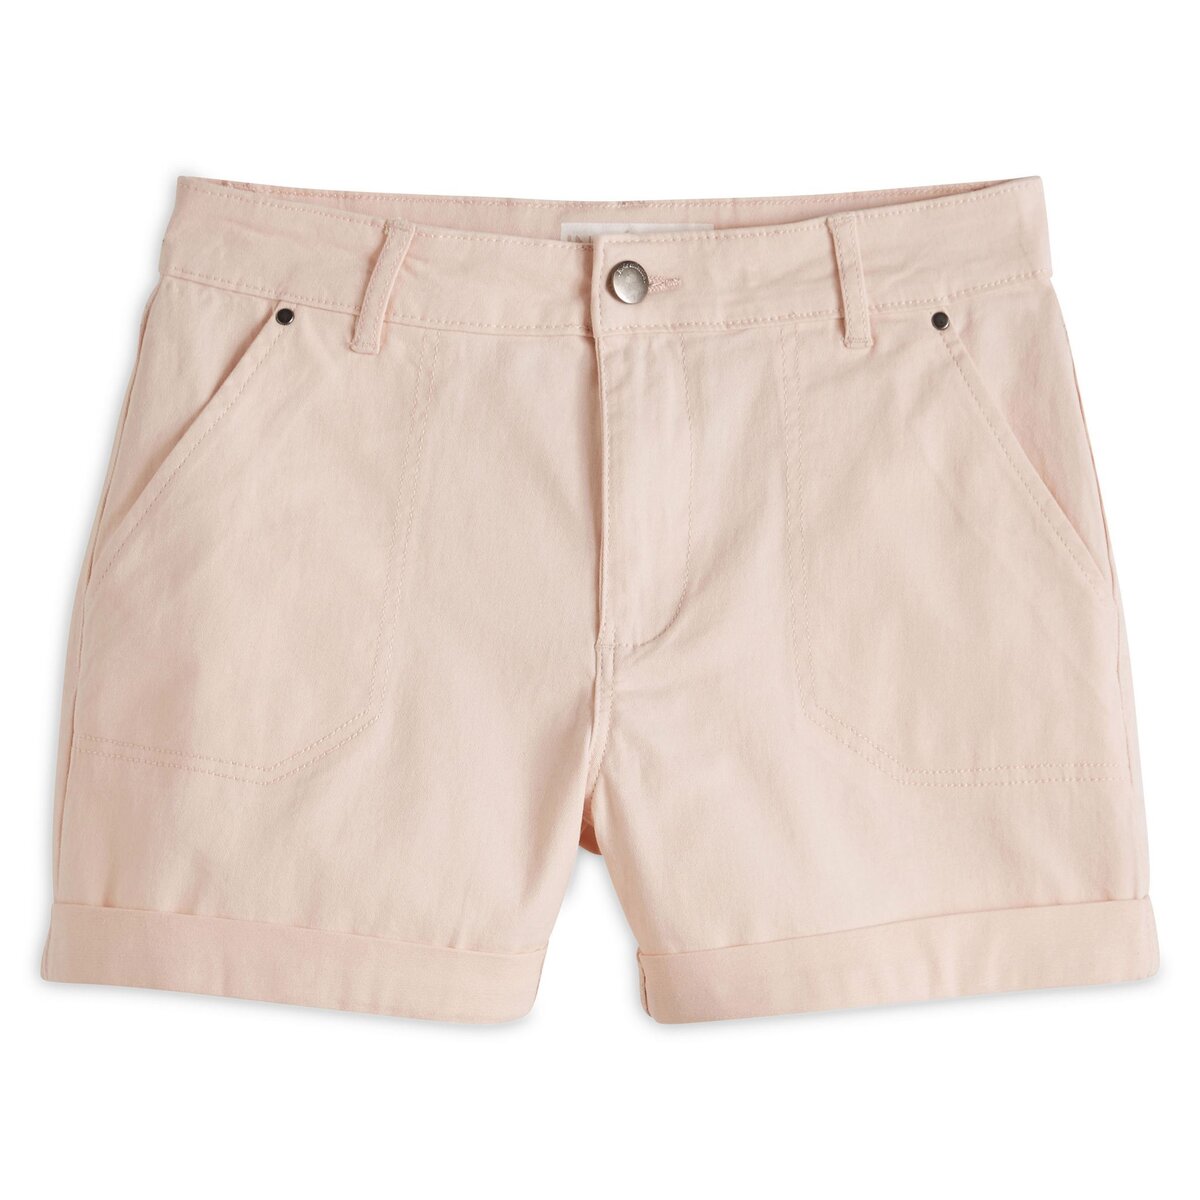 INEXTENSO Short twill rose pale femme